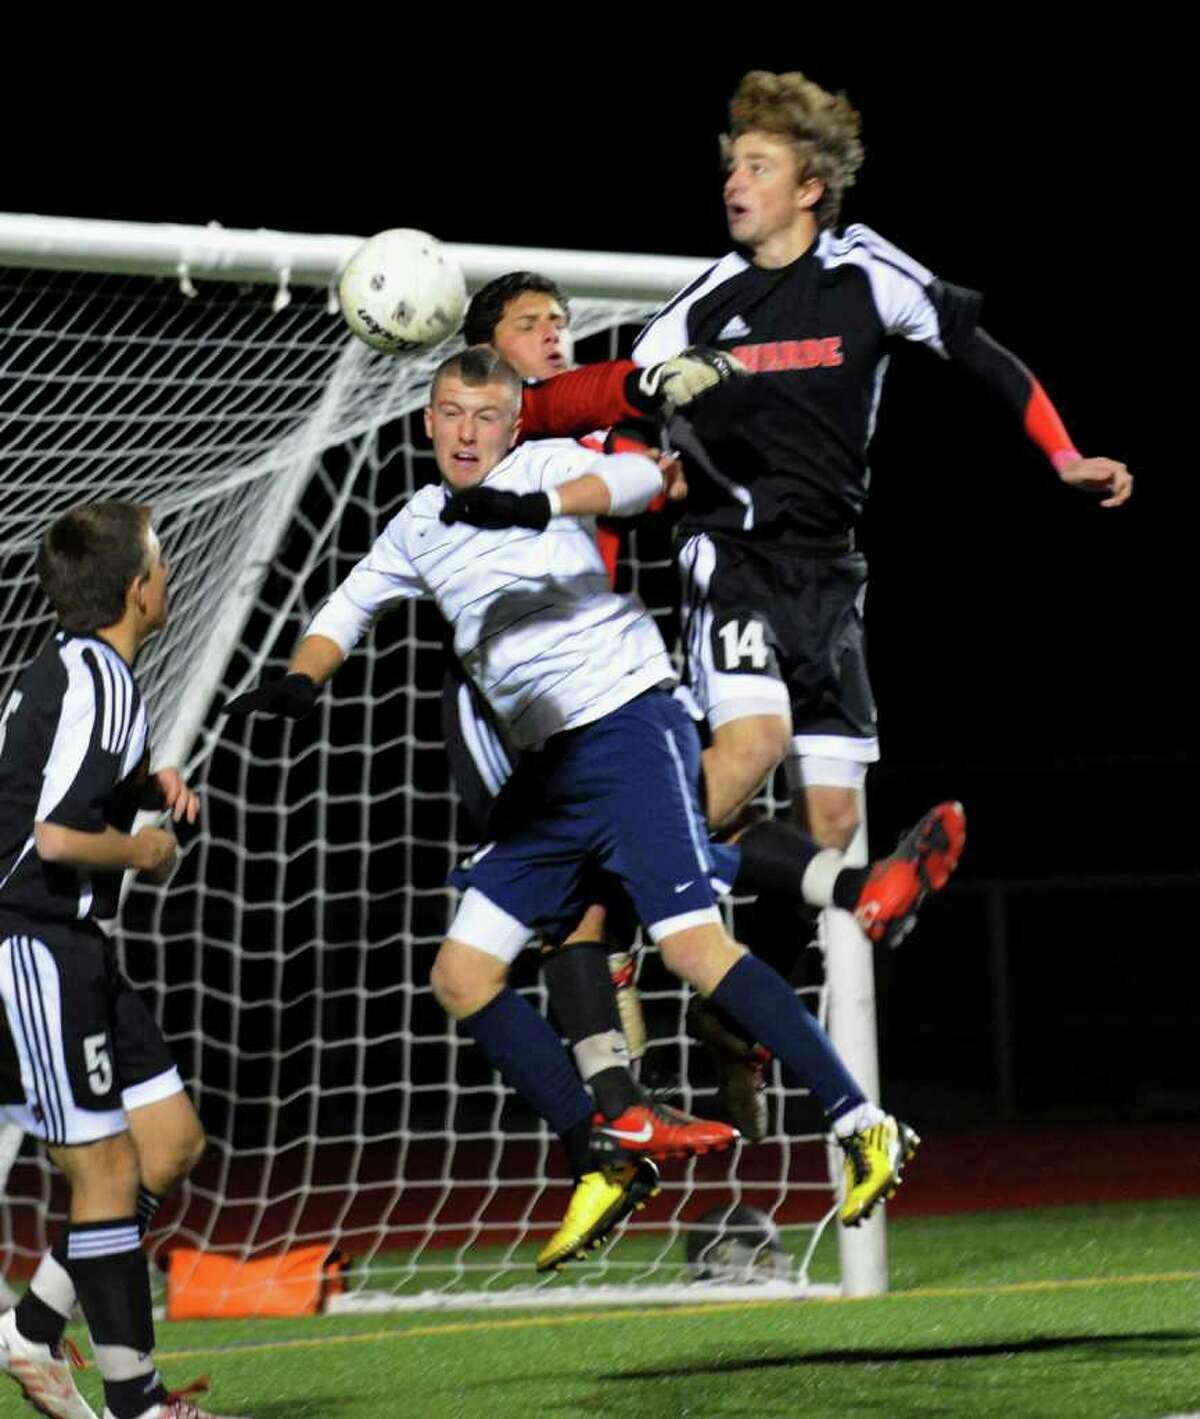 Staples #9 Brendan Lesch tries to head the ball in for a goal but is hampered by Fairfield Warde goalie Dylan Strachan, top center, and #14 Connor Gavey, top right, during FCIAC Championship boys soccer in Norwalk, Conn. on Wednesday November 03, 2010.